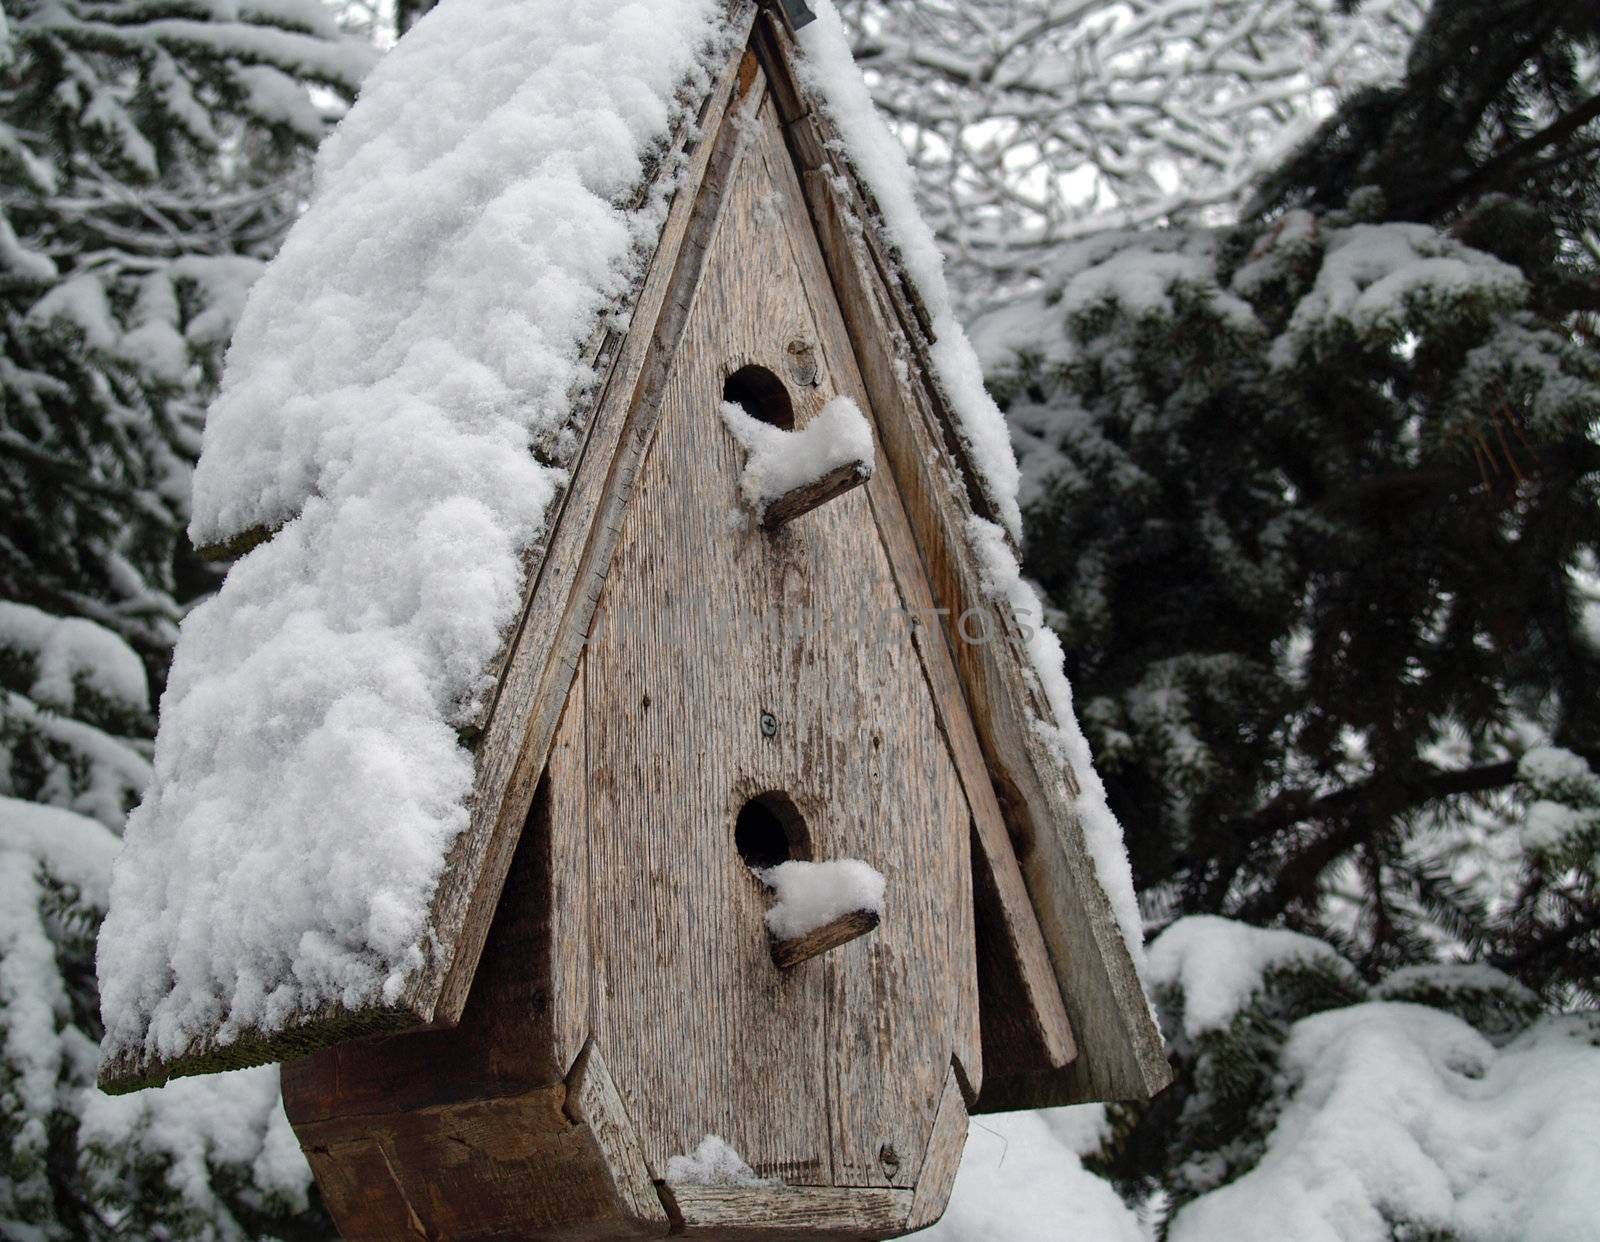 A Snow Covered Birdhouse After a Snowfall by Frankljunior